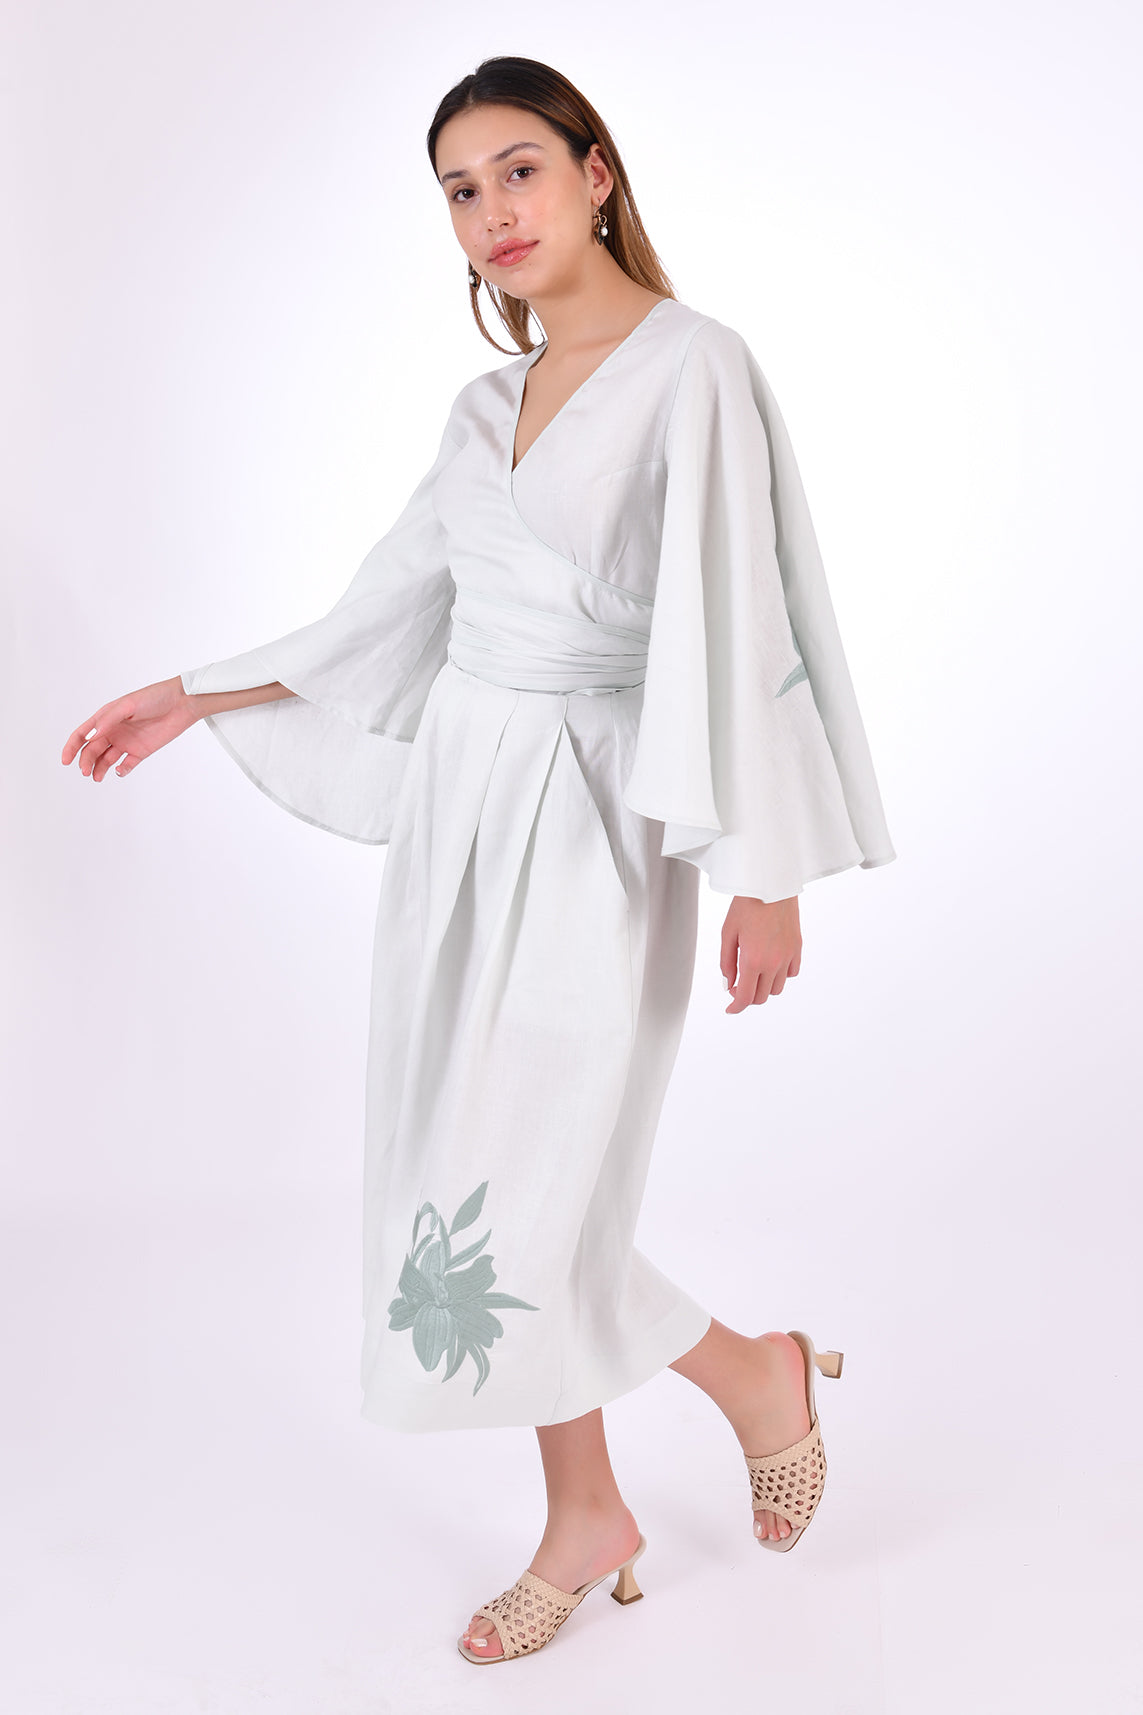 Fanm Mon Des-Vu Linen Shorts Set (Side View). 2-Piece Linen Shorts & Top Set. Featuring a wrap top with wide long sleeves and long pleated shorts with embroidery.